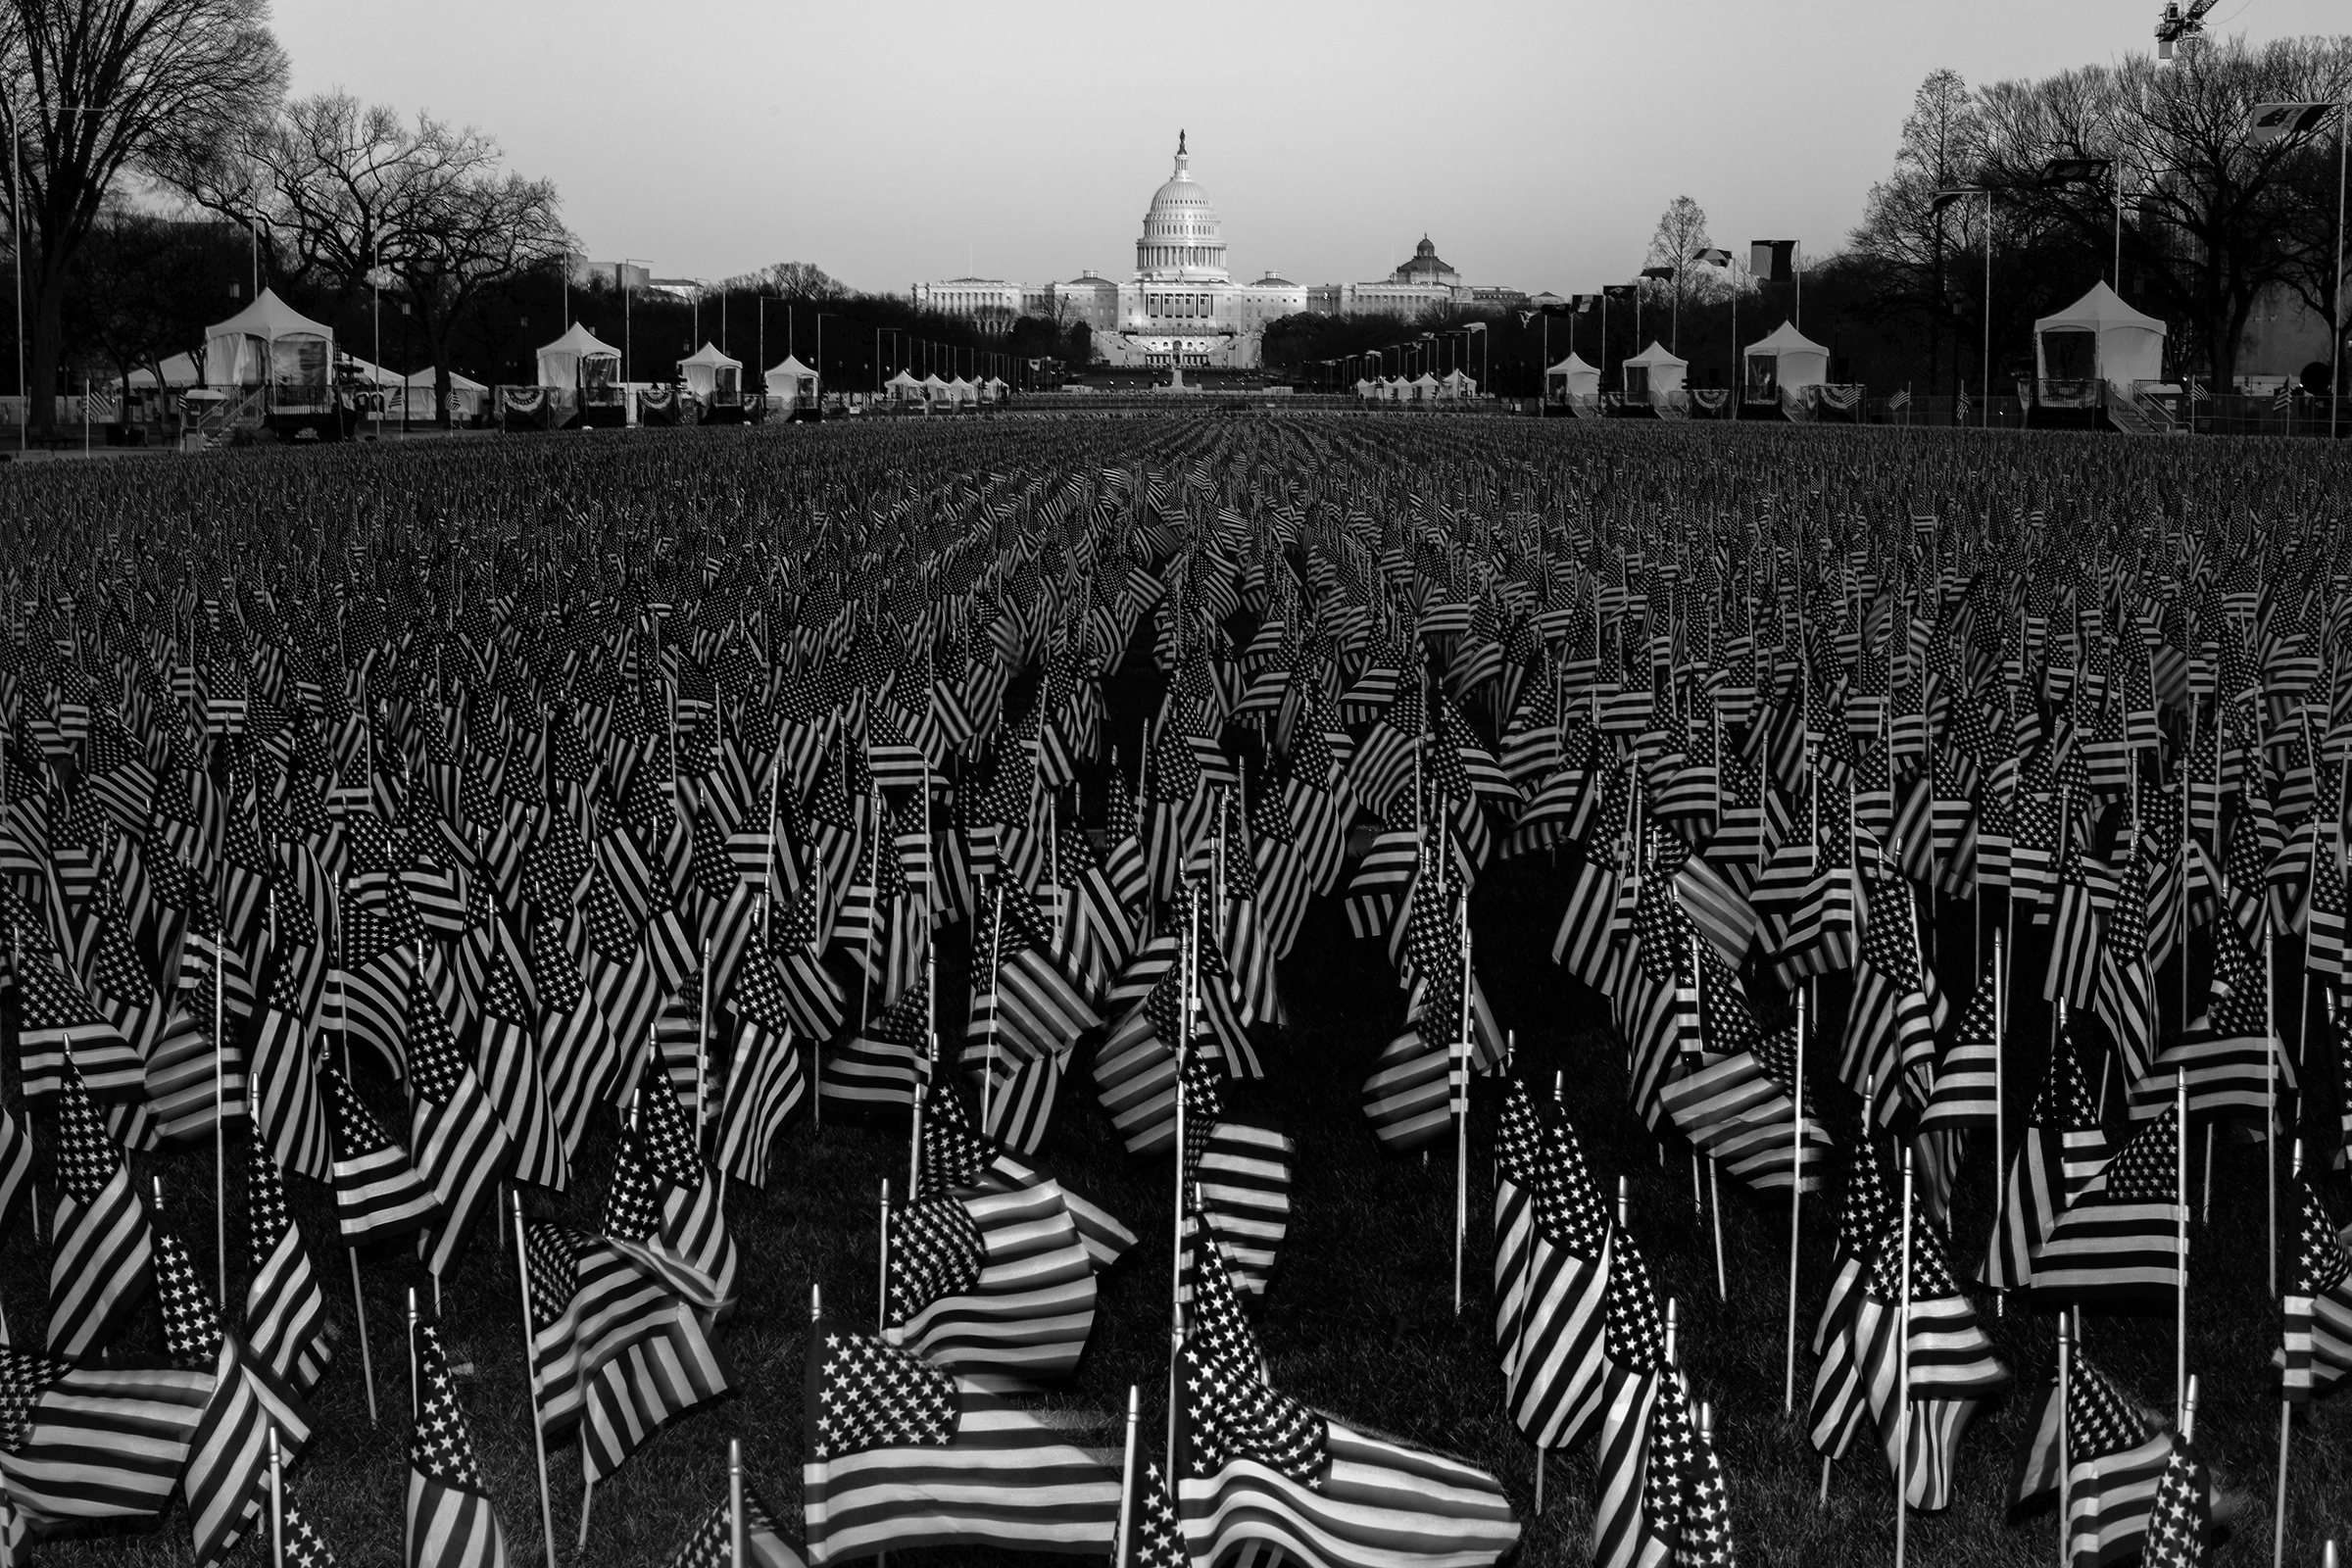 A field of flags on the National Mall in Washington, D.C., on Jan. 19, one day before the inauguration of President-elect Joe Biden and Vice President-elect Kamala Harris. The public art display featured nearly 200,000 flags, representing Americans who would have gathered for the inauguration, according to the organizing committee.